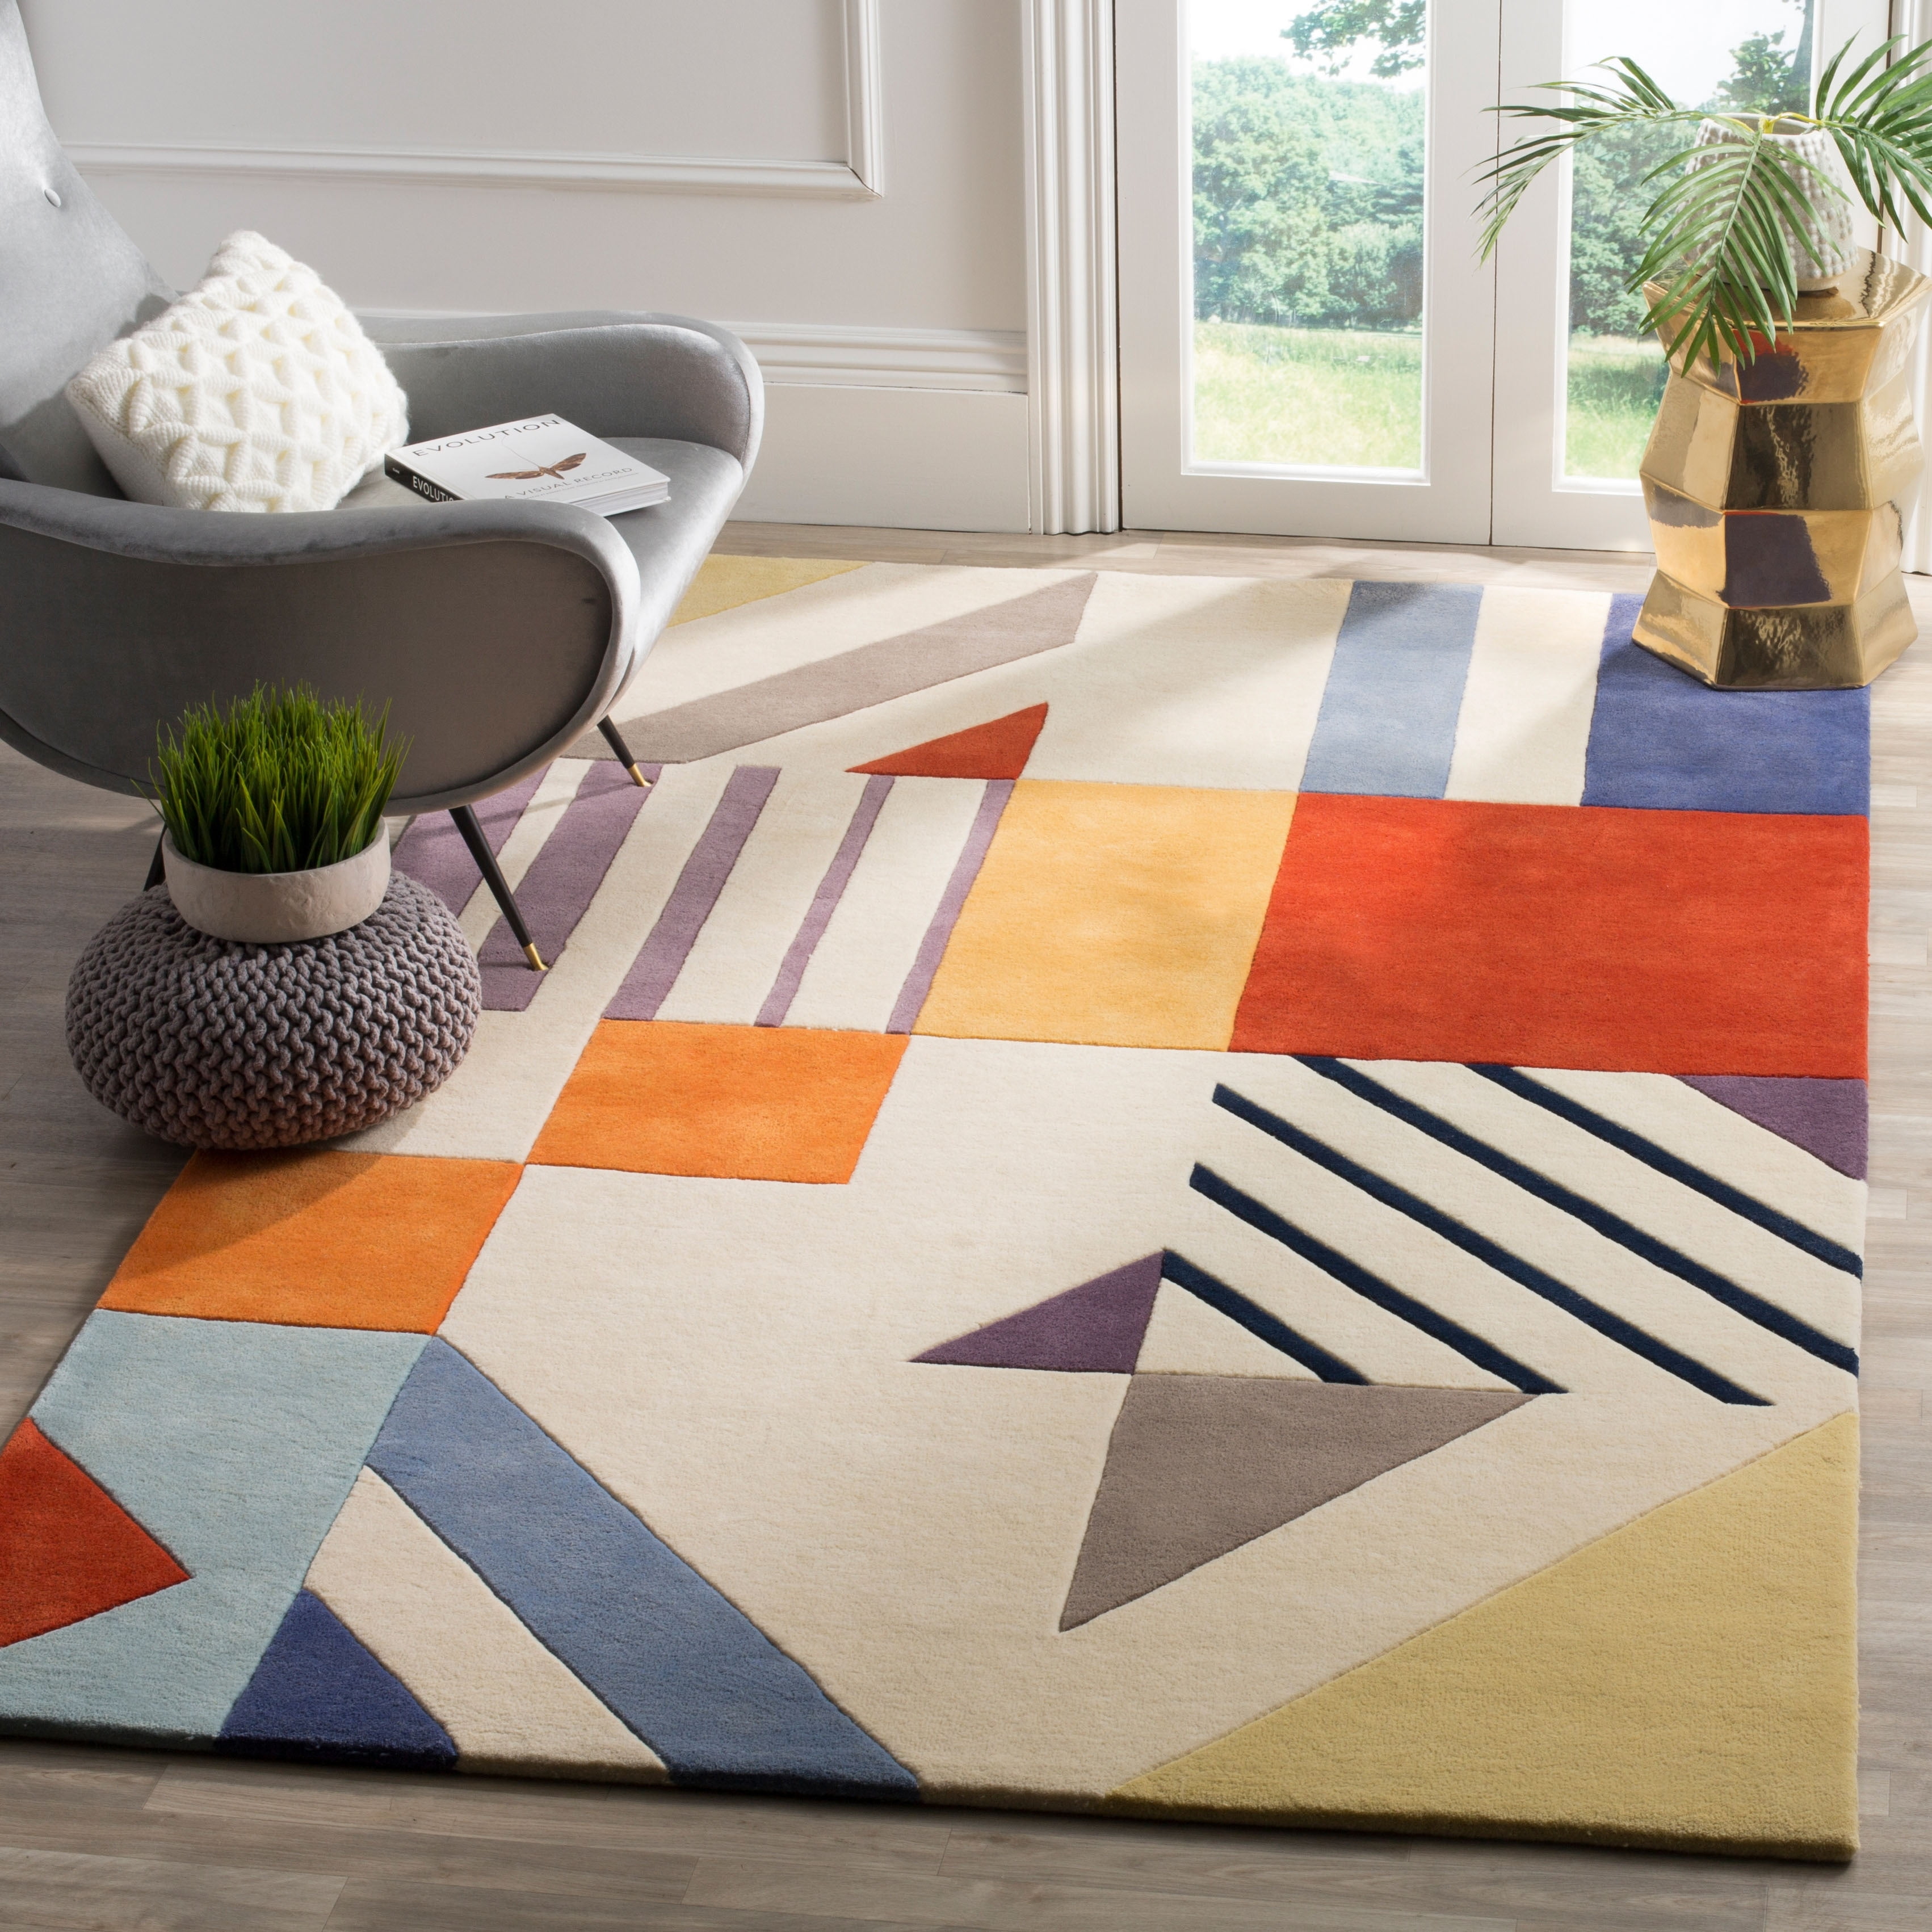 Contemporary Design Handmade Patchwork Rug ft Multiple Colors Wool 5' 7 x 8' 3 